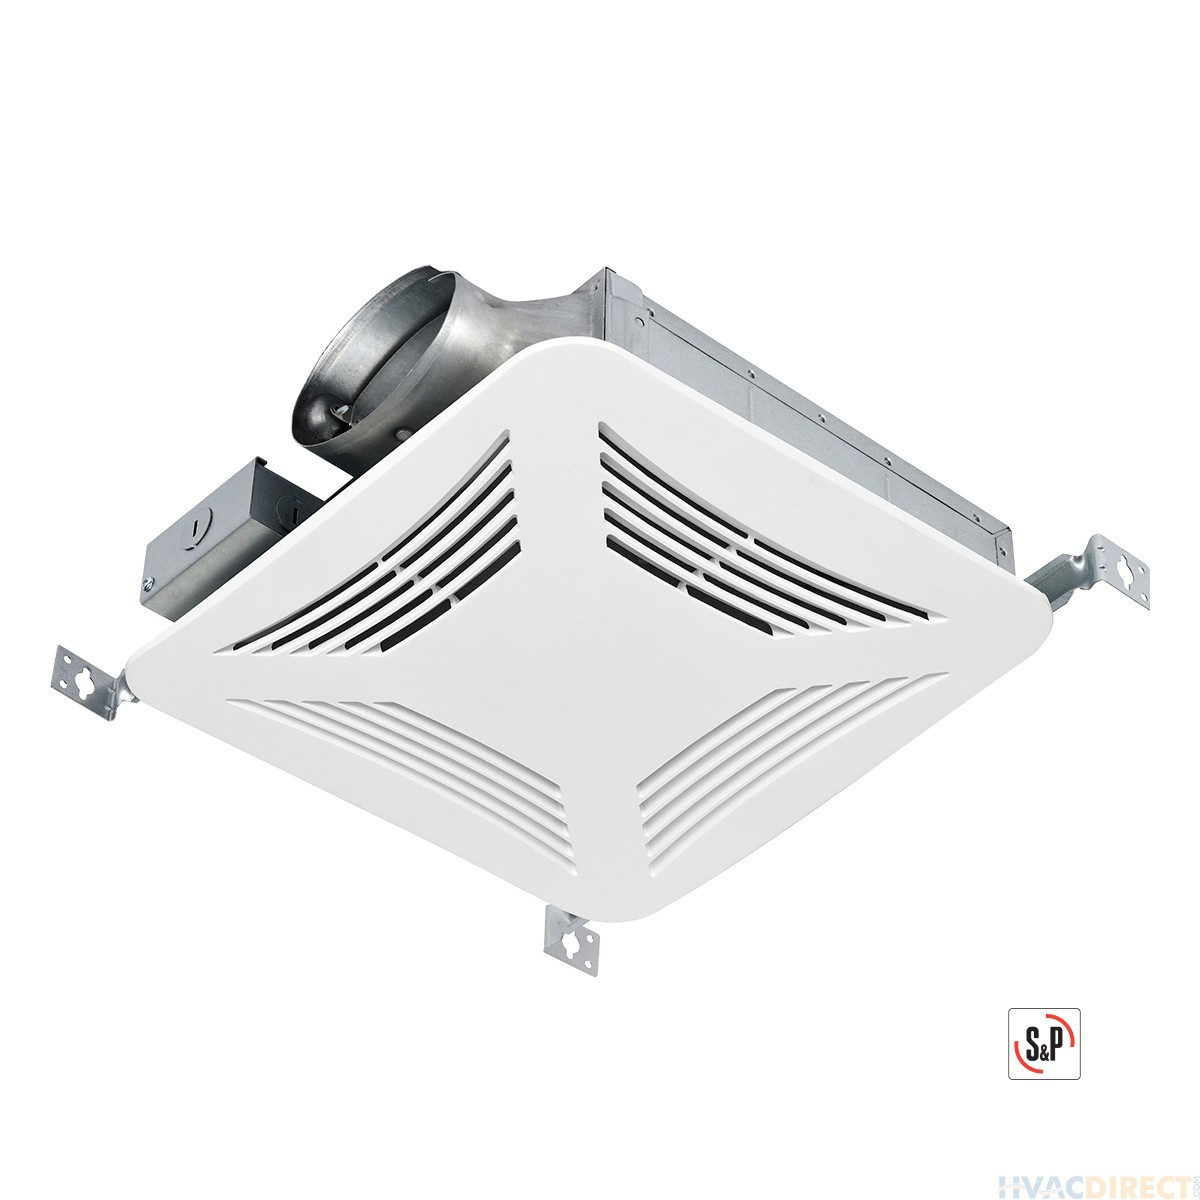 Sp Premium Choice Ceiling Mounted Bathroom Exhaust Fan 100 Cfm Pclp100 intended for size 1200 X 1200